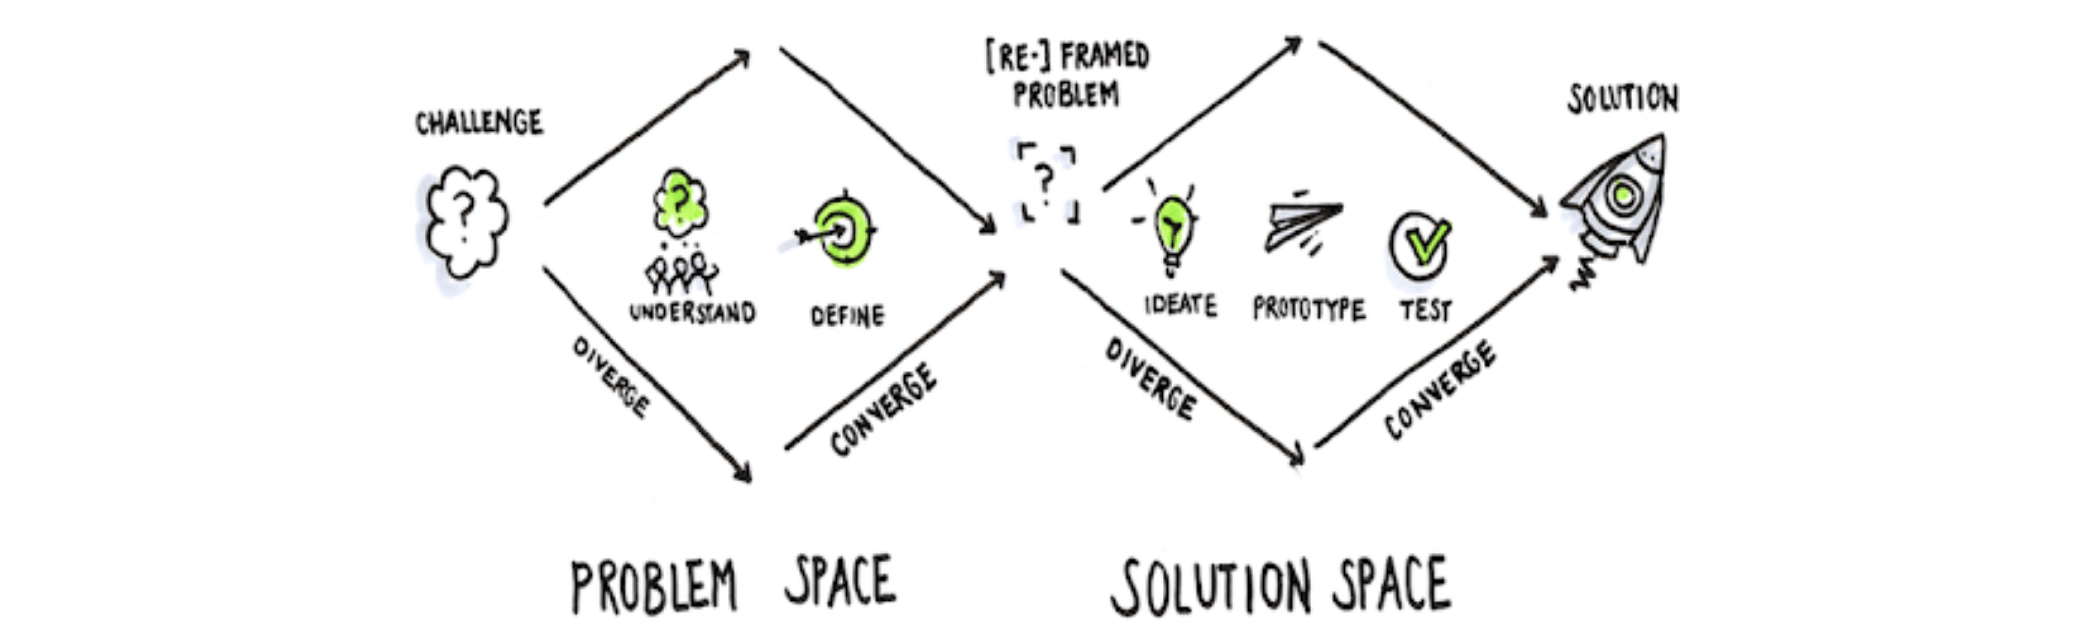 Problem and solution space